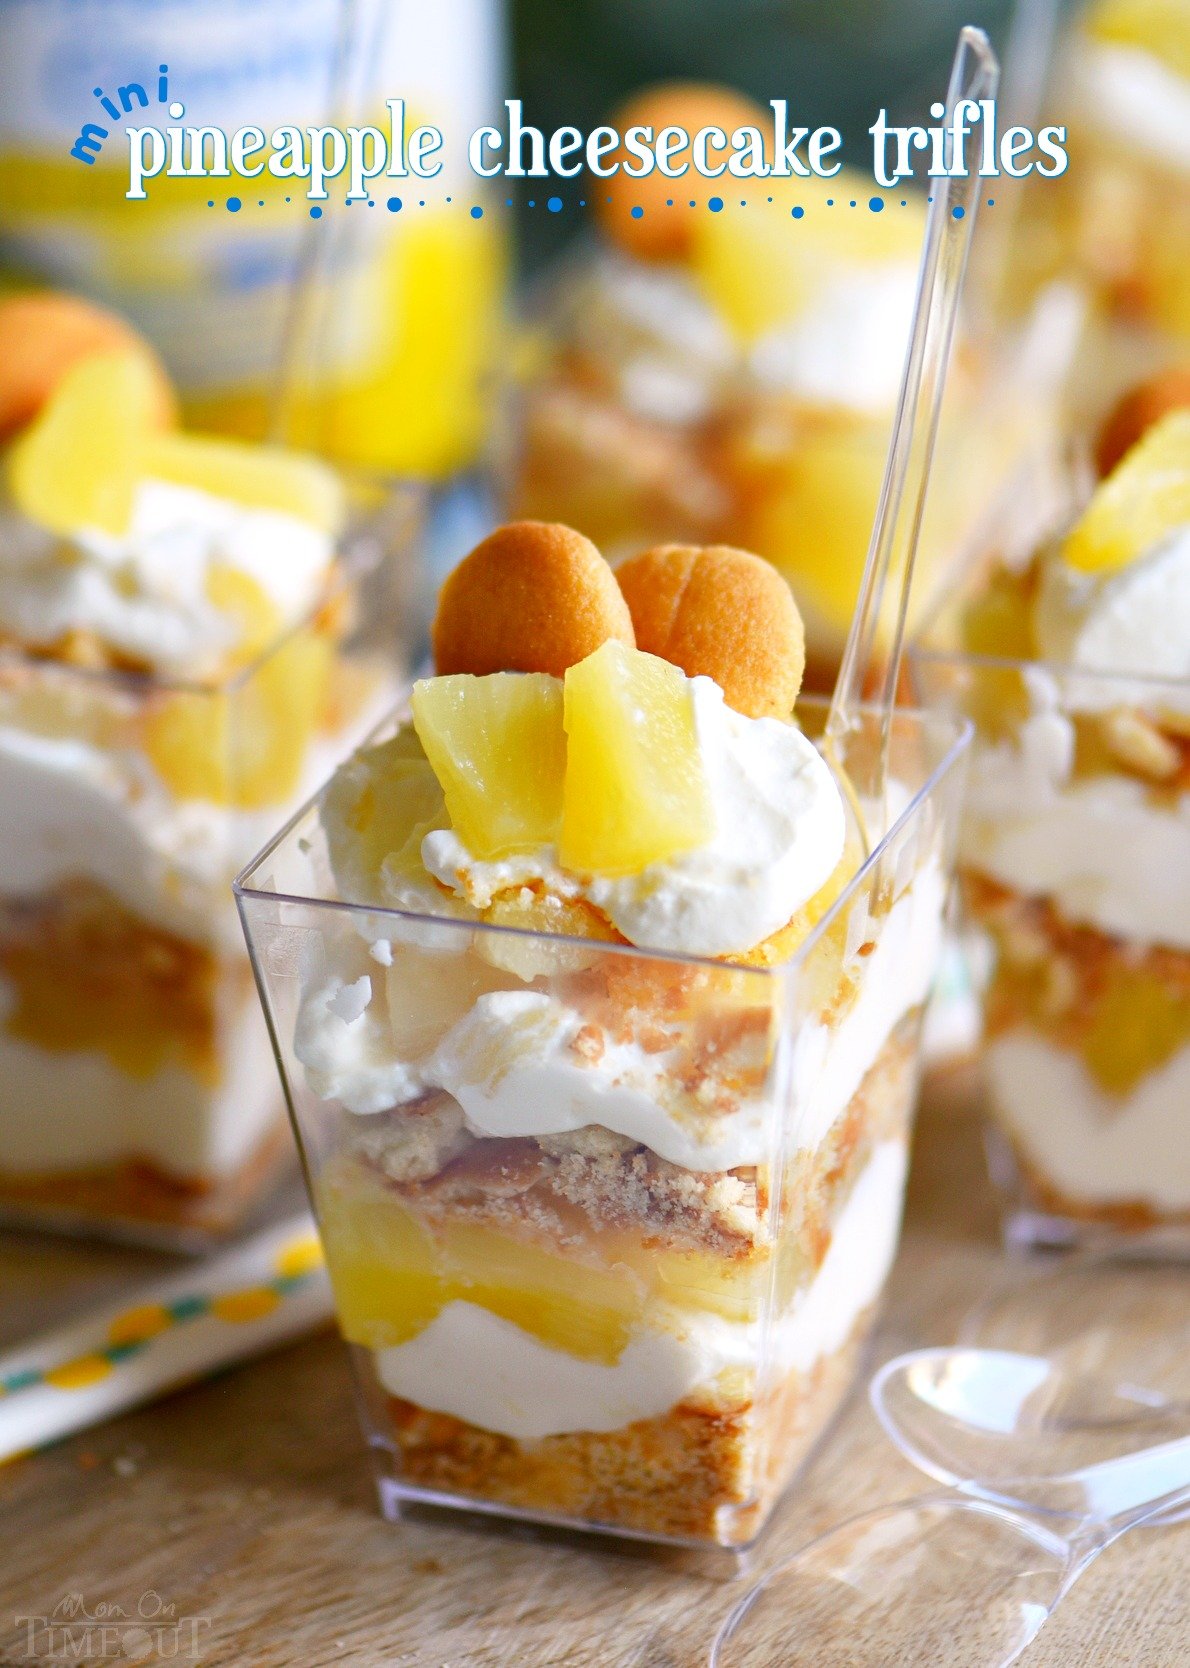 These Mini Pineapple Cheesecake Trifles are loaded with pineapple flavor! Perfect for an after-school snack, dessert, or party! // Mom On Timeout @DoleSunshine #SharetheSunshine #ad